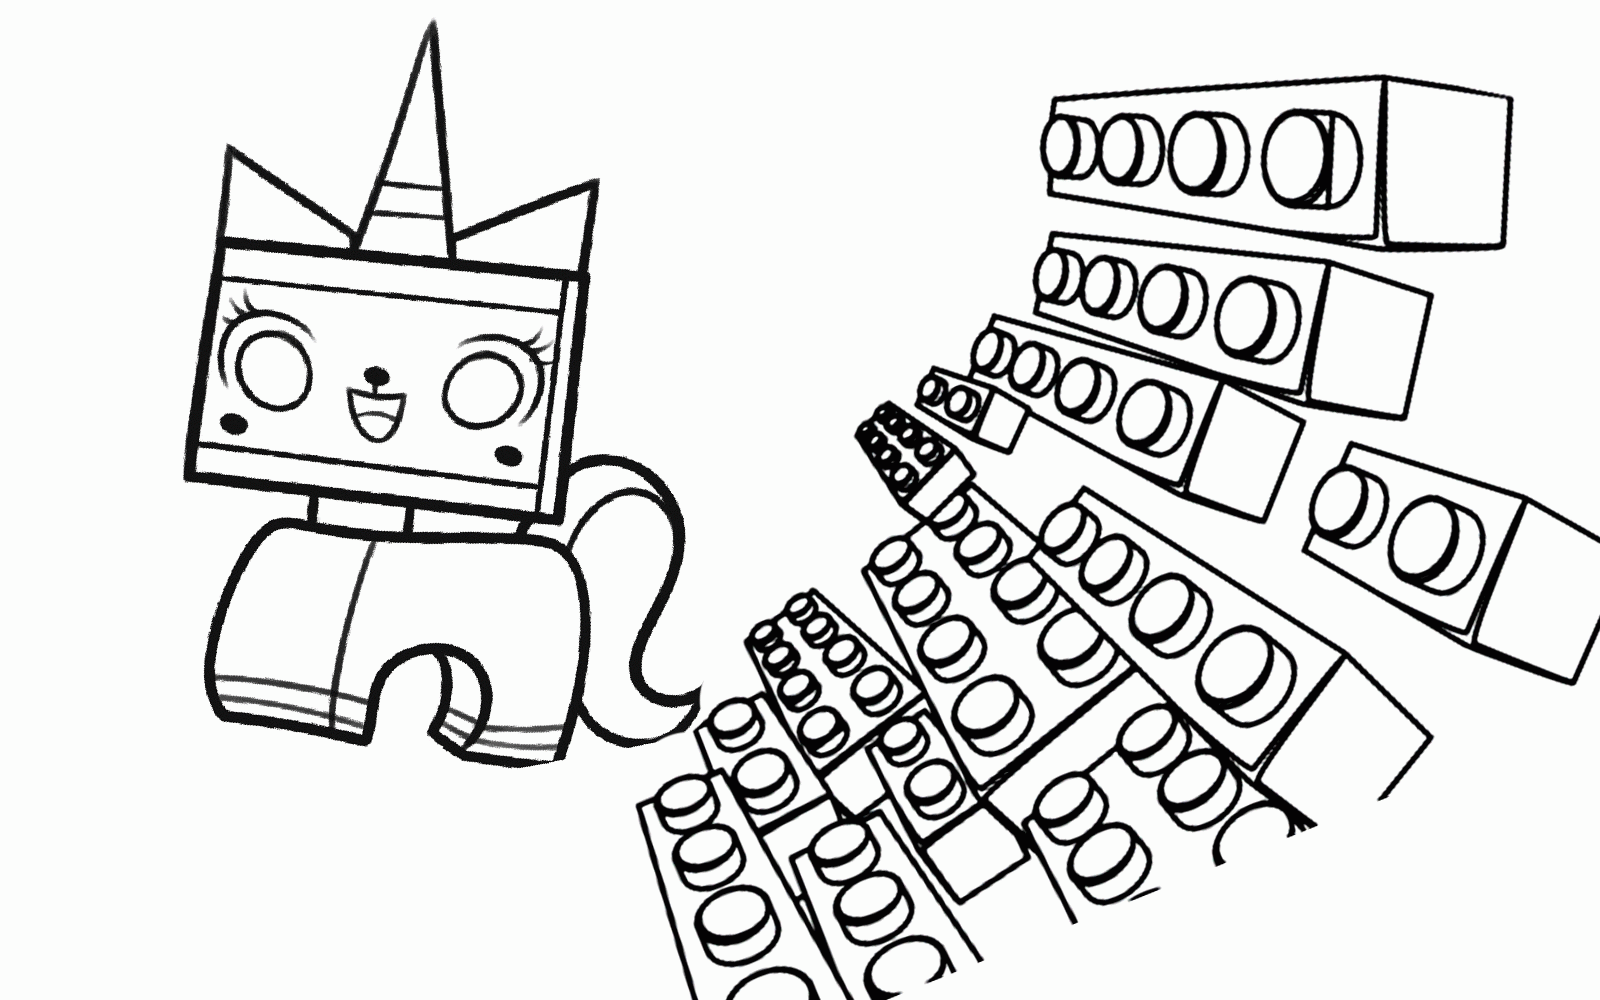 lego boy and block coloring page Coloring pages kids: coloring pages for kids lego guys printing